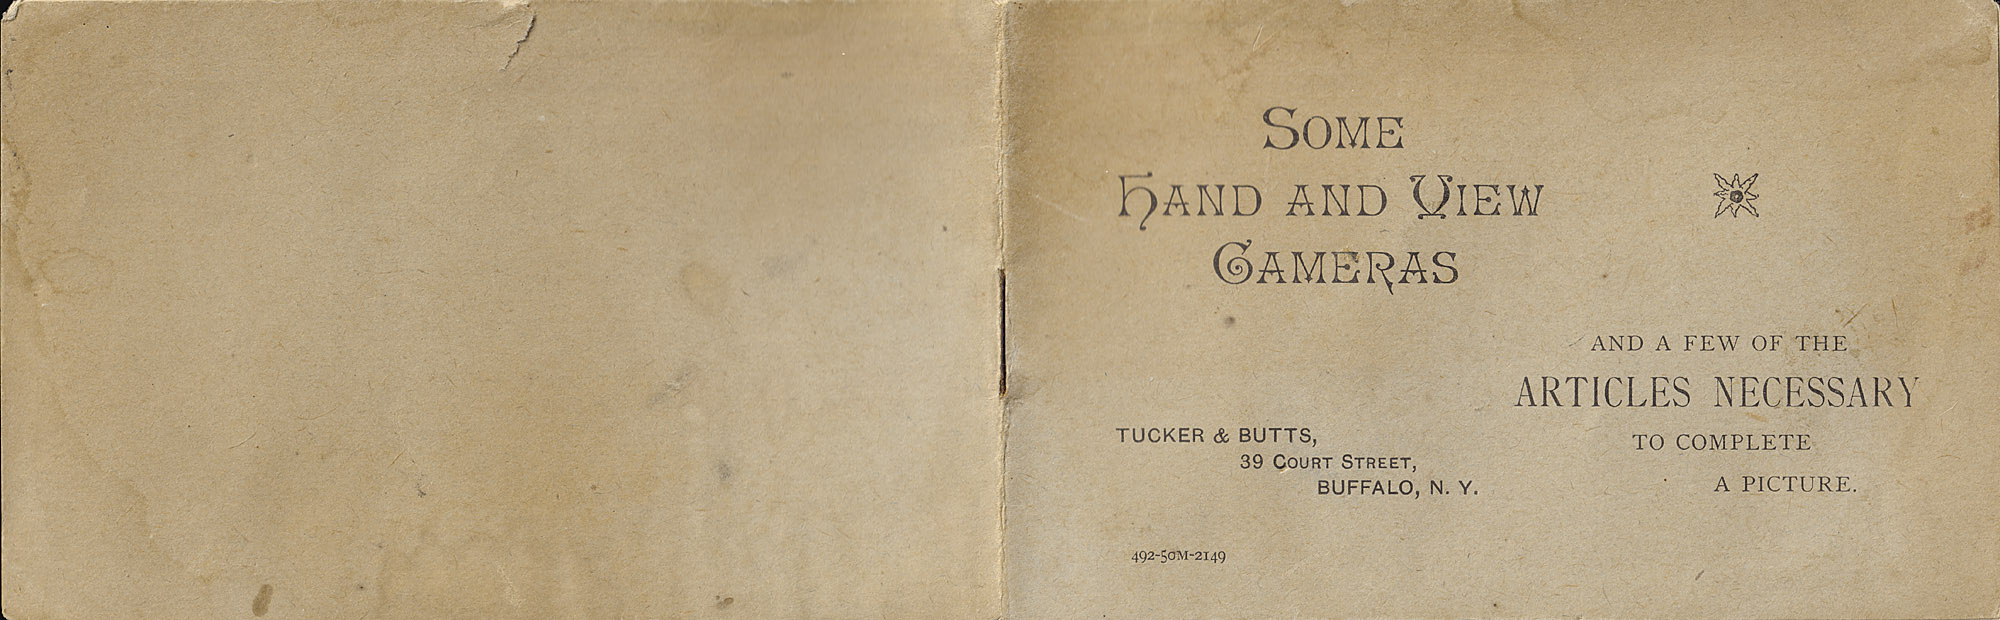 1136.some.hand.and.view.cams.tucker&butts.c1892-covers-2000.jpg